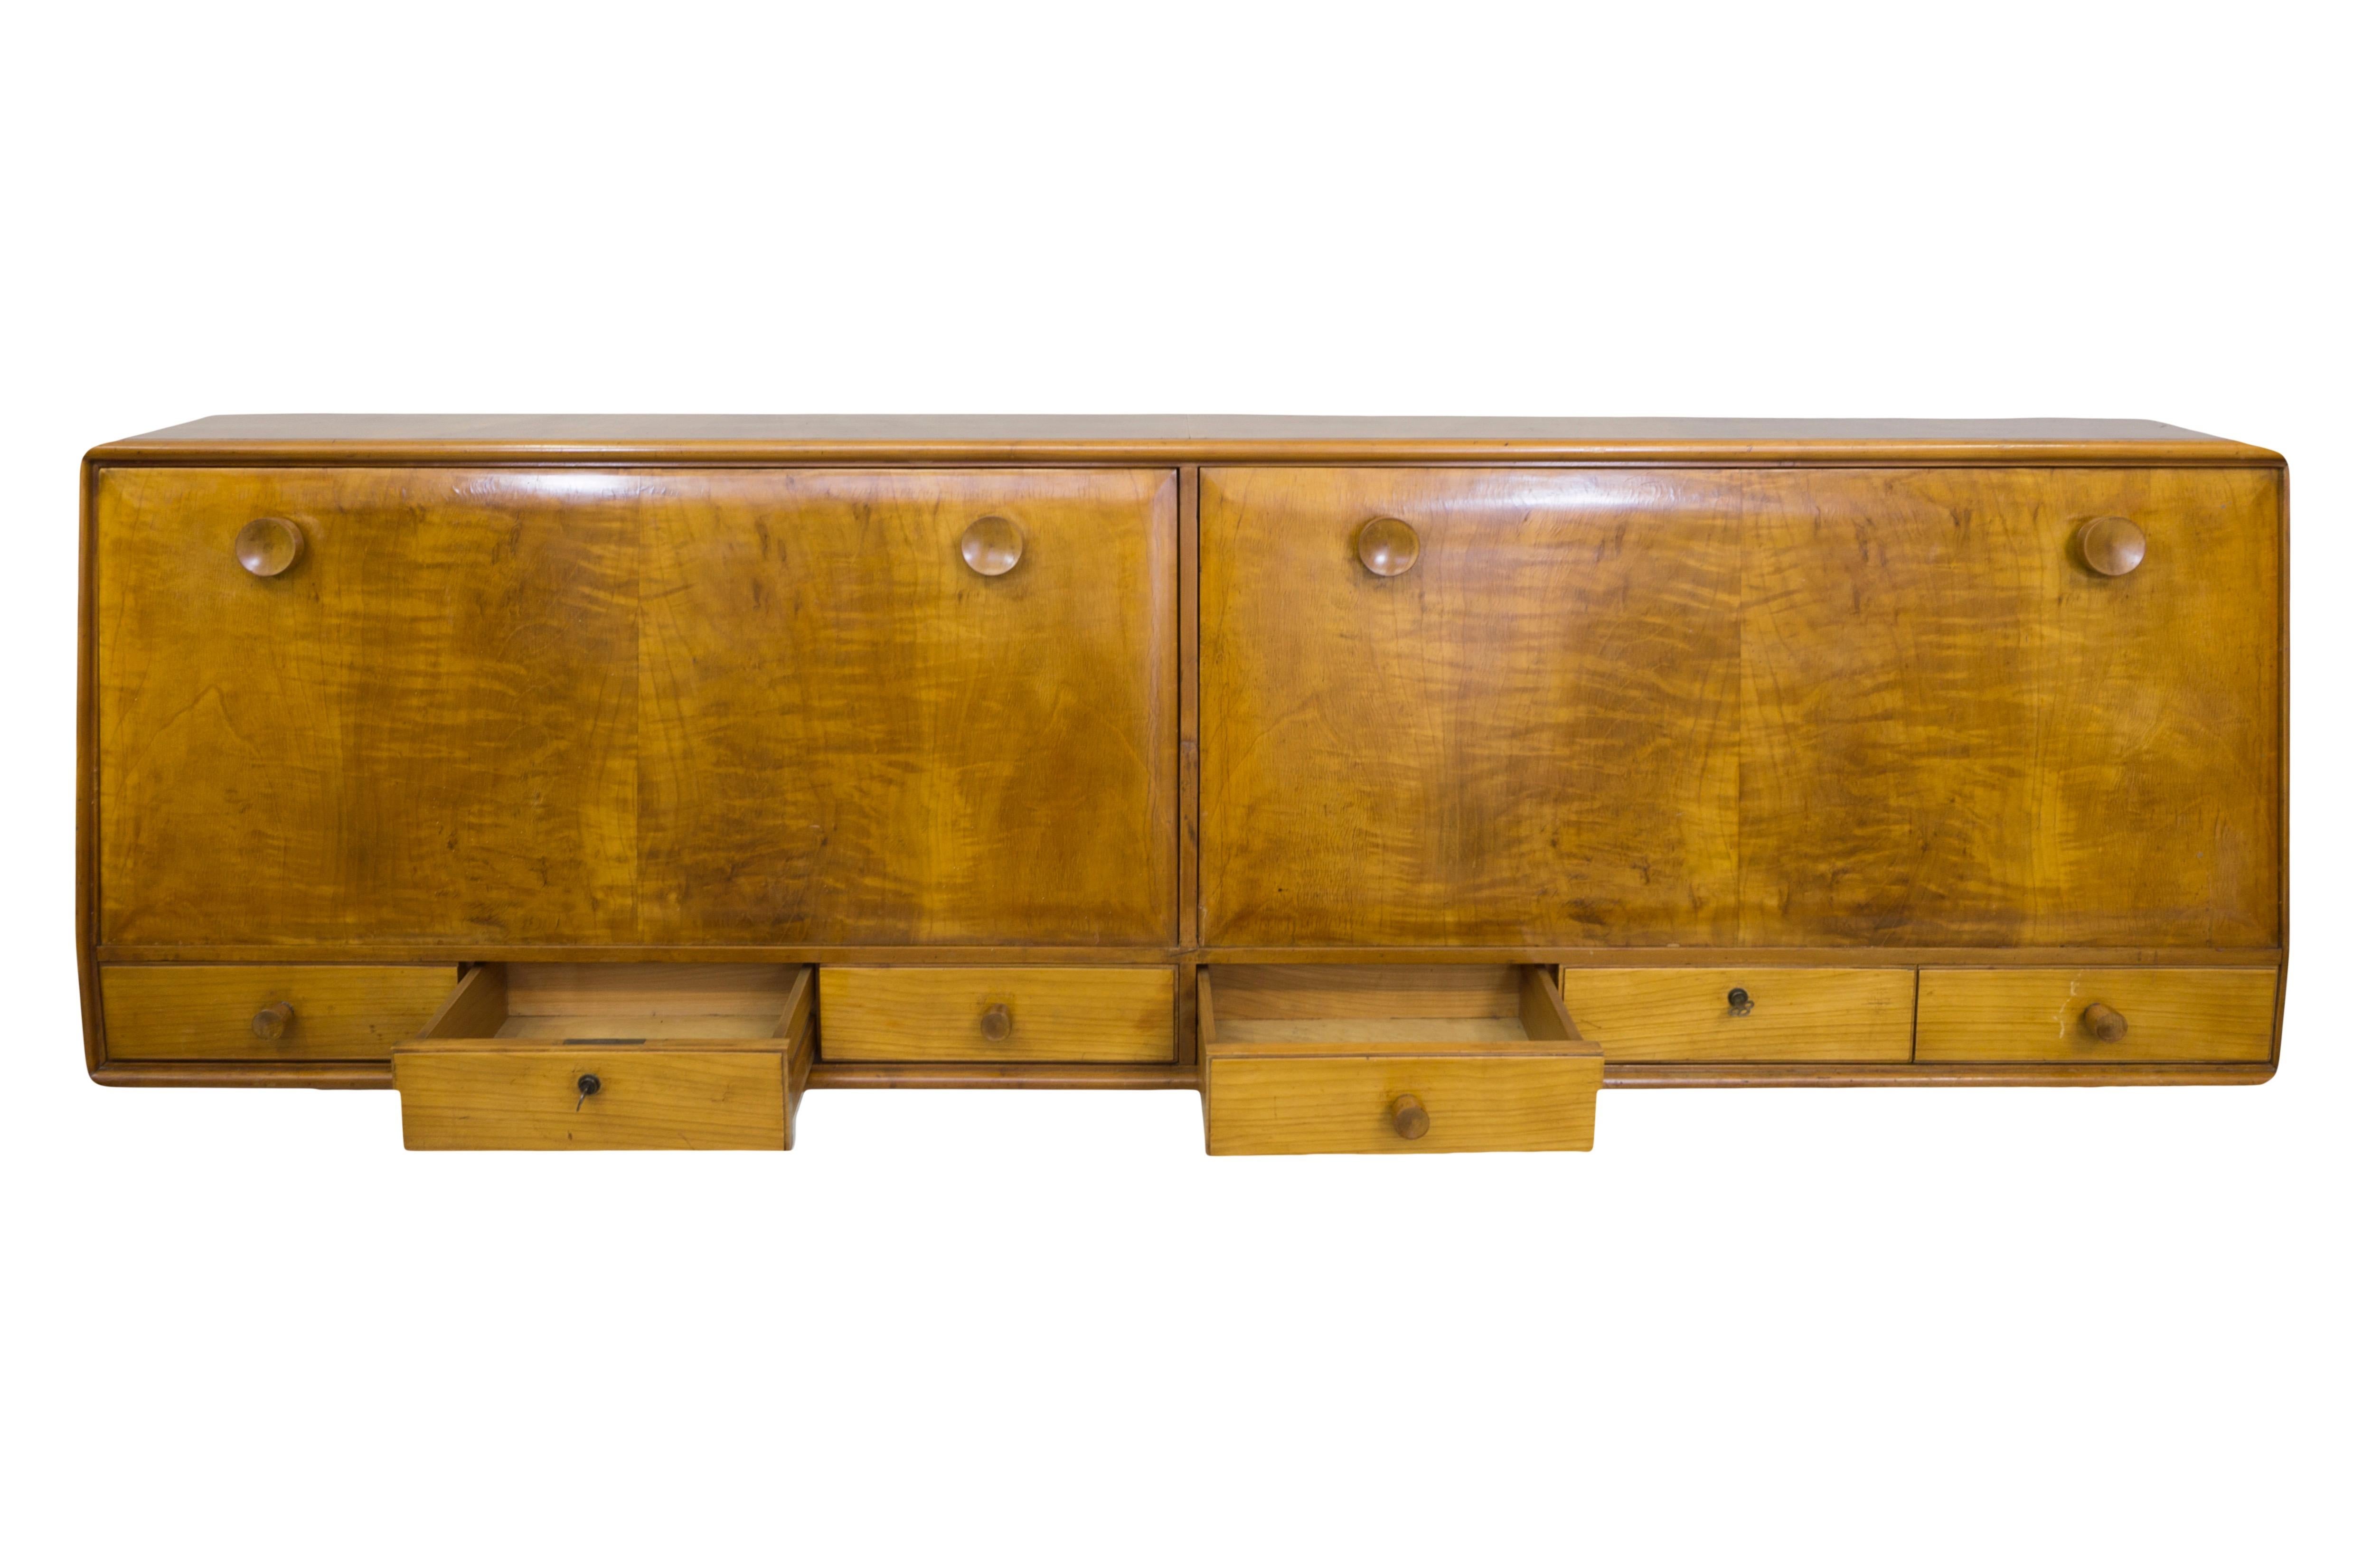 Italian Hanging Bar Unit by Gio Ponti, 1930 For Sale